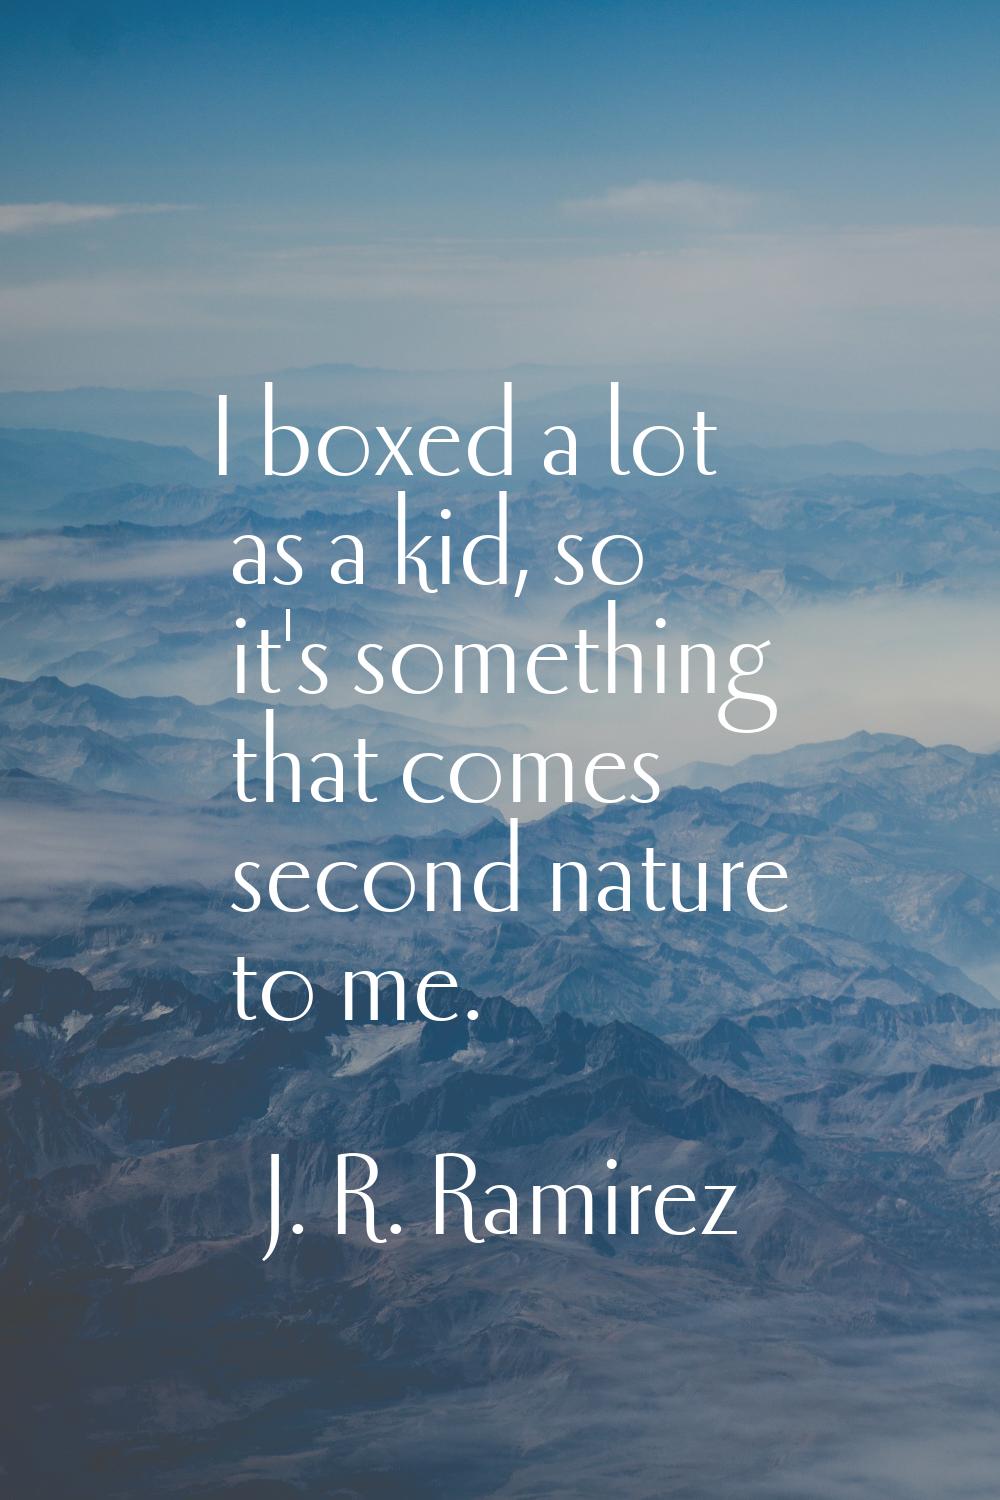 I boxed a lot as a kid, so it's something that comes second nature to me.